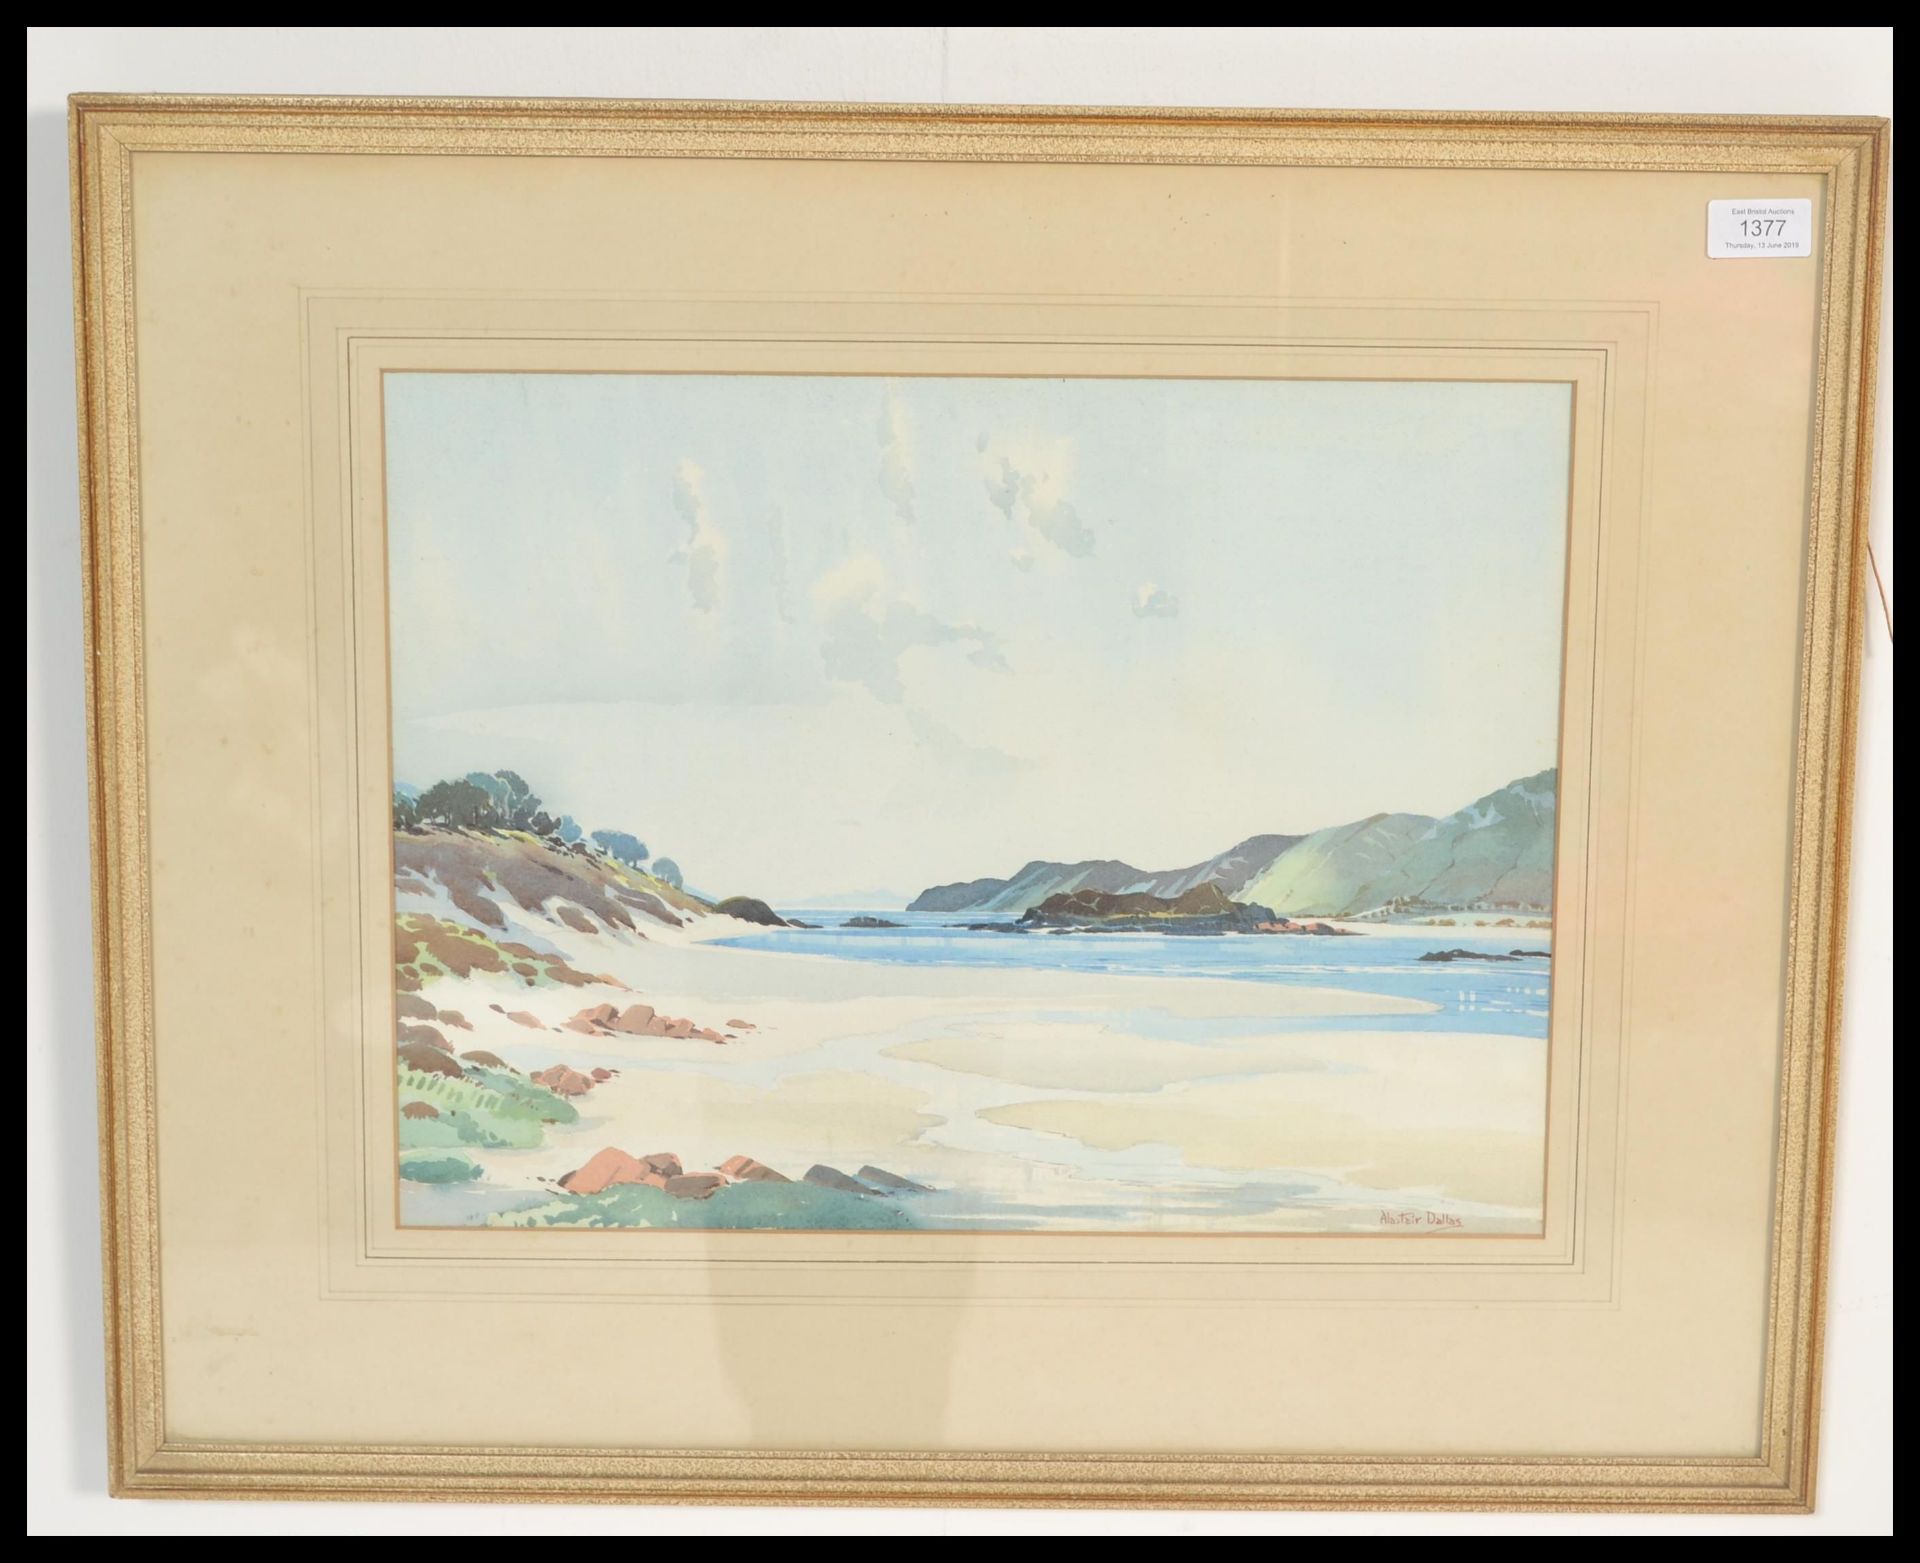 Alastair Dallas (1898 - 1995)-  A 20th Century watercolour painting on paper depicting a coastal